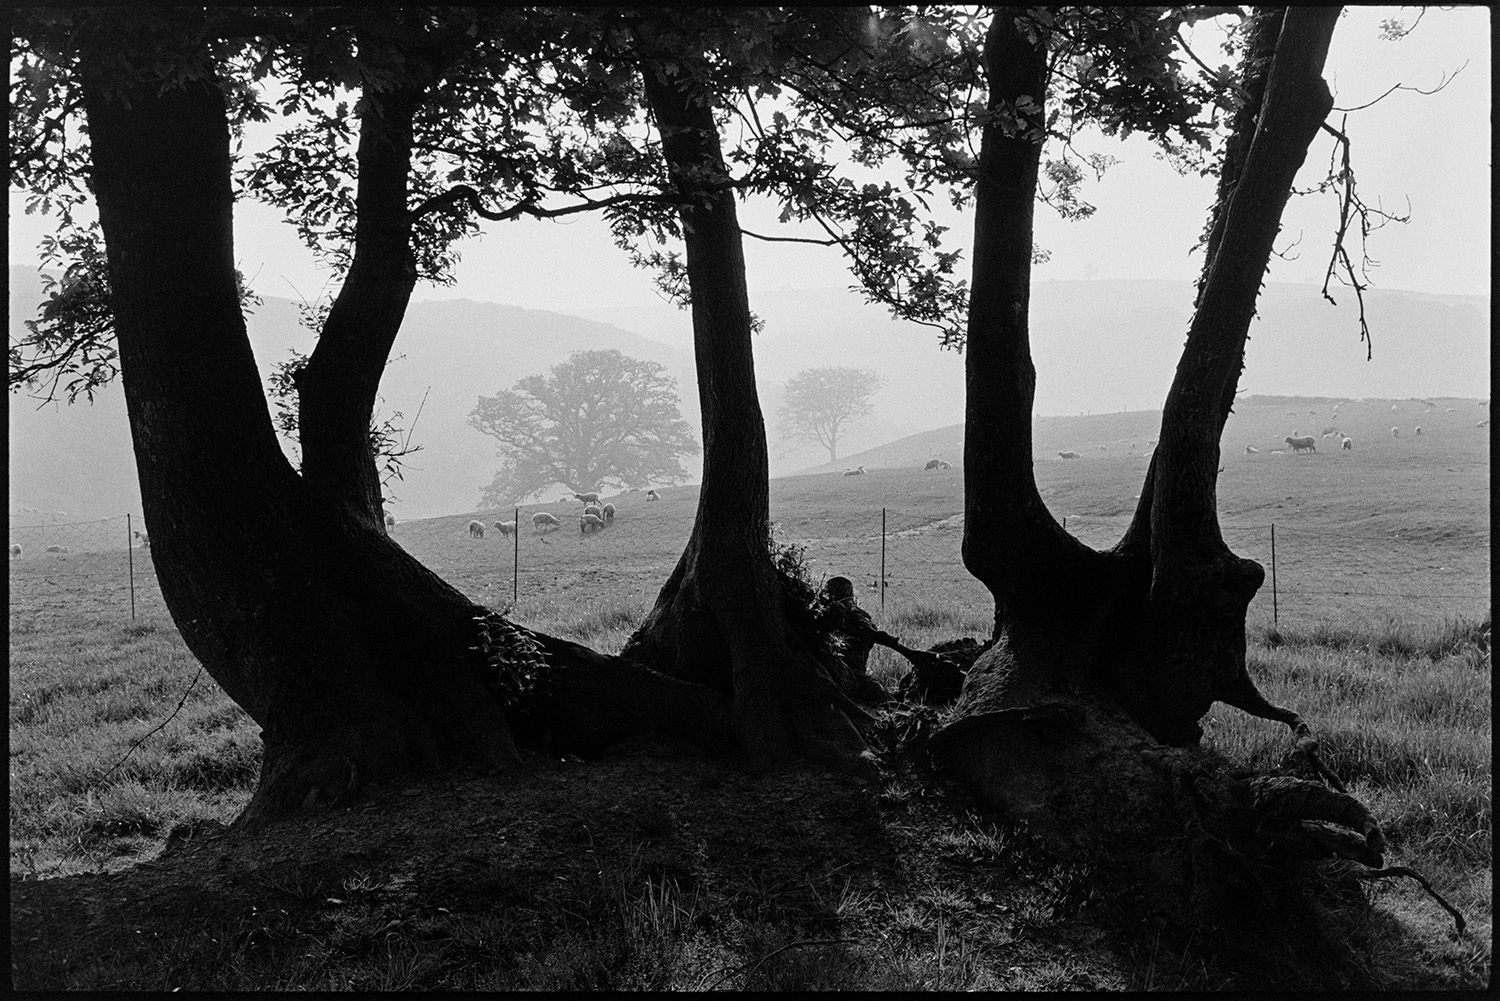 Misty landscape, tree trunks. 
[Tree trunks at the edge of a field in Densham, Ashreigney. Sheep can be seen grazing in the misty field behind the trees.]